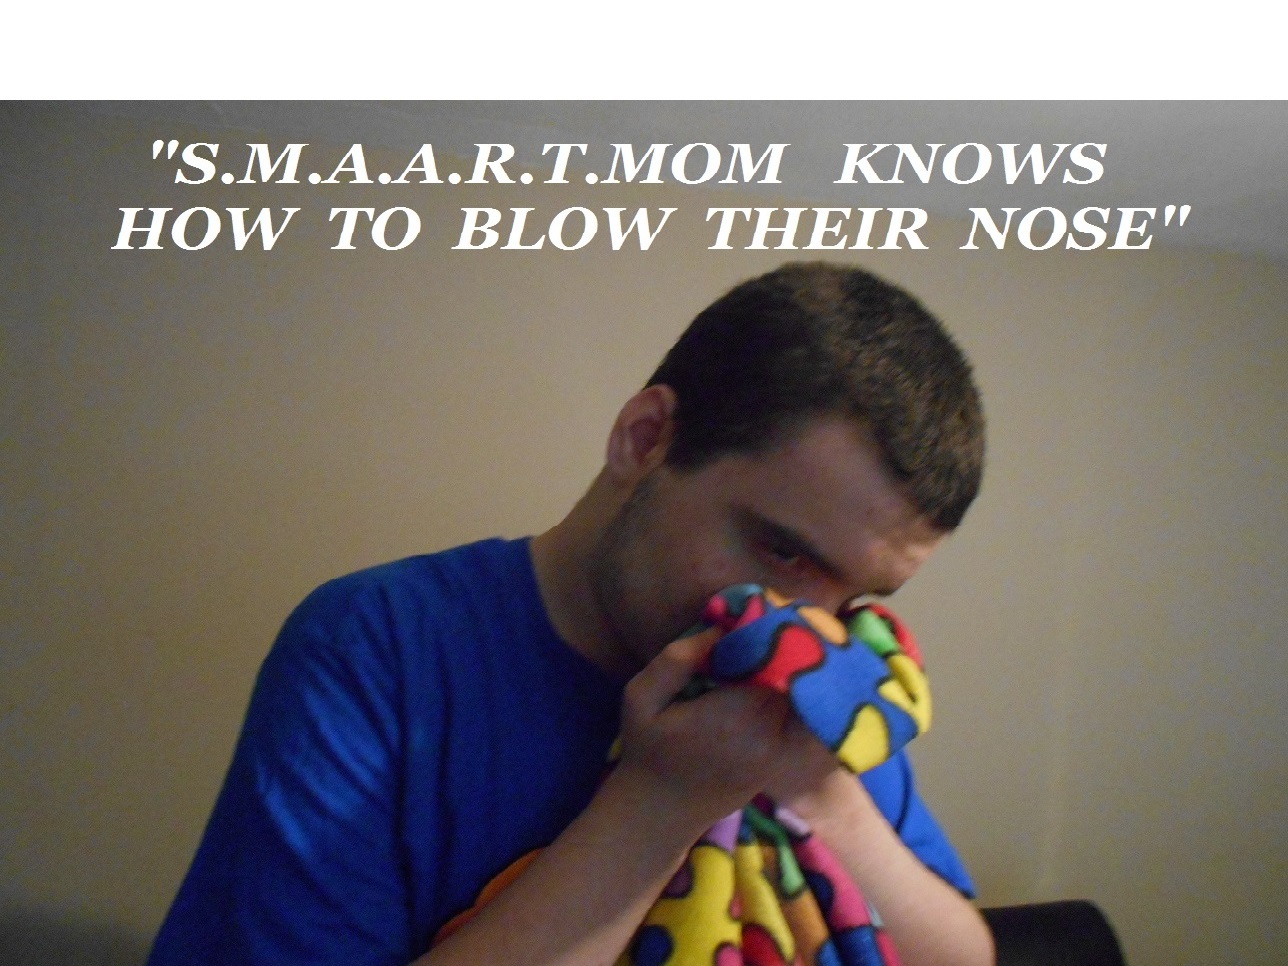 "Click-On  Dustin Blowing his Nose to Watch Video"